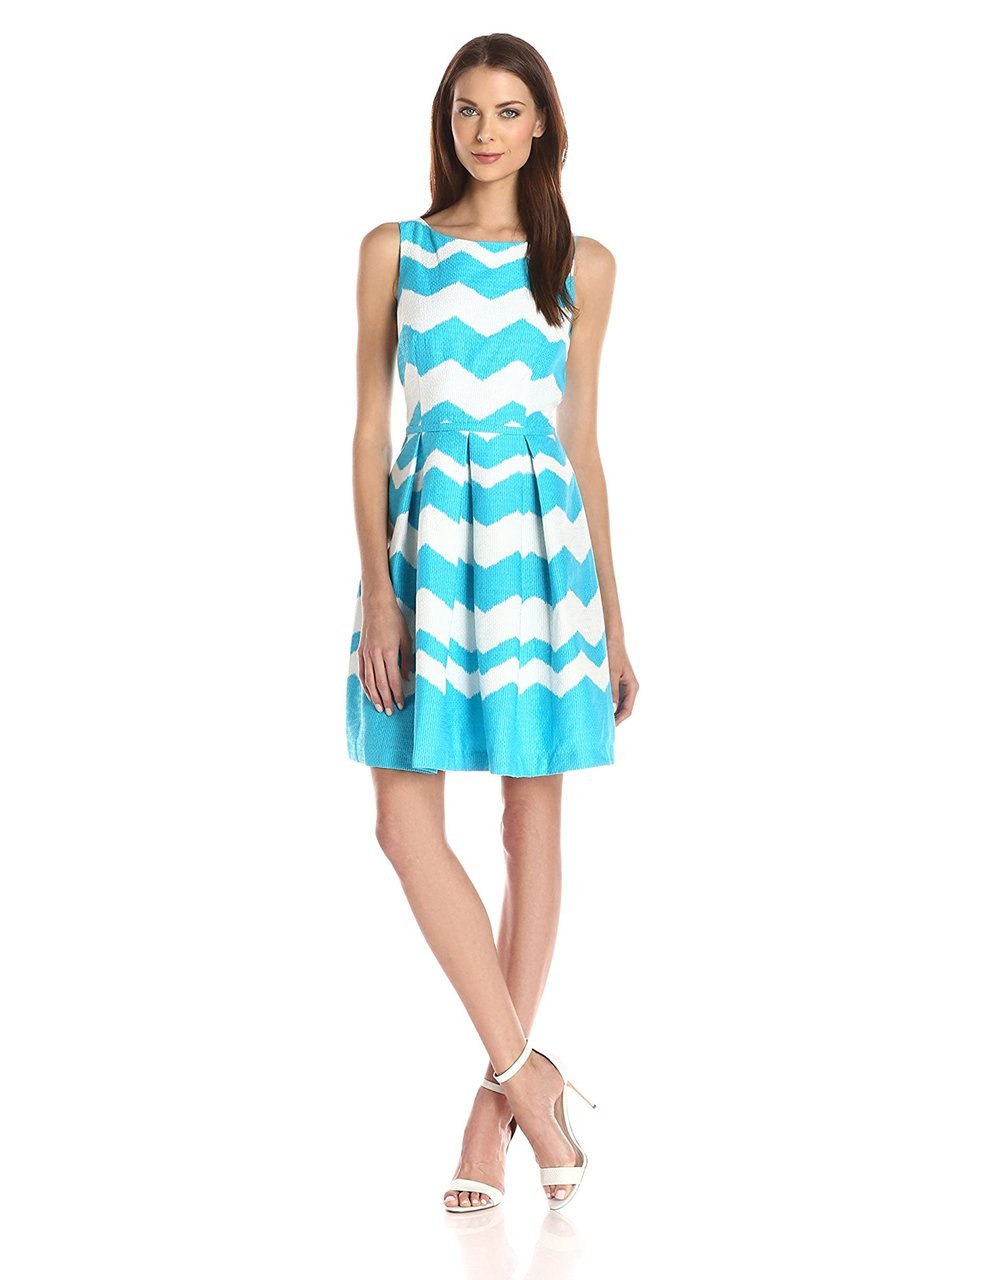 Taylor - Pleated Chevron Jacquard Dress 5445M in Blue and White